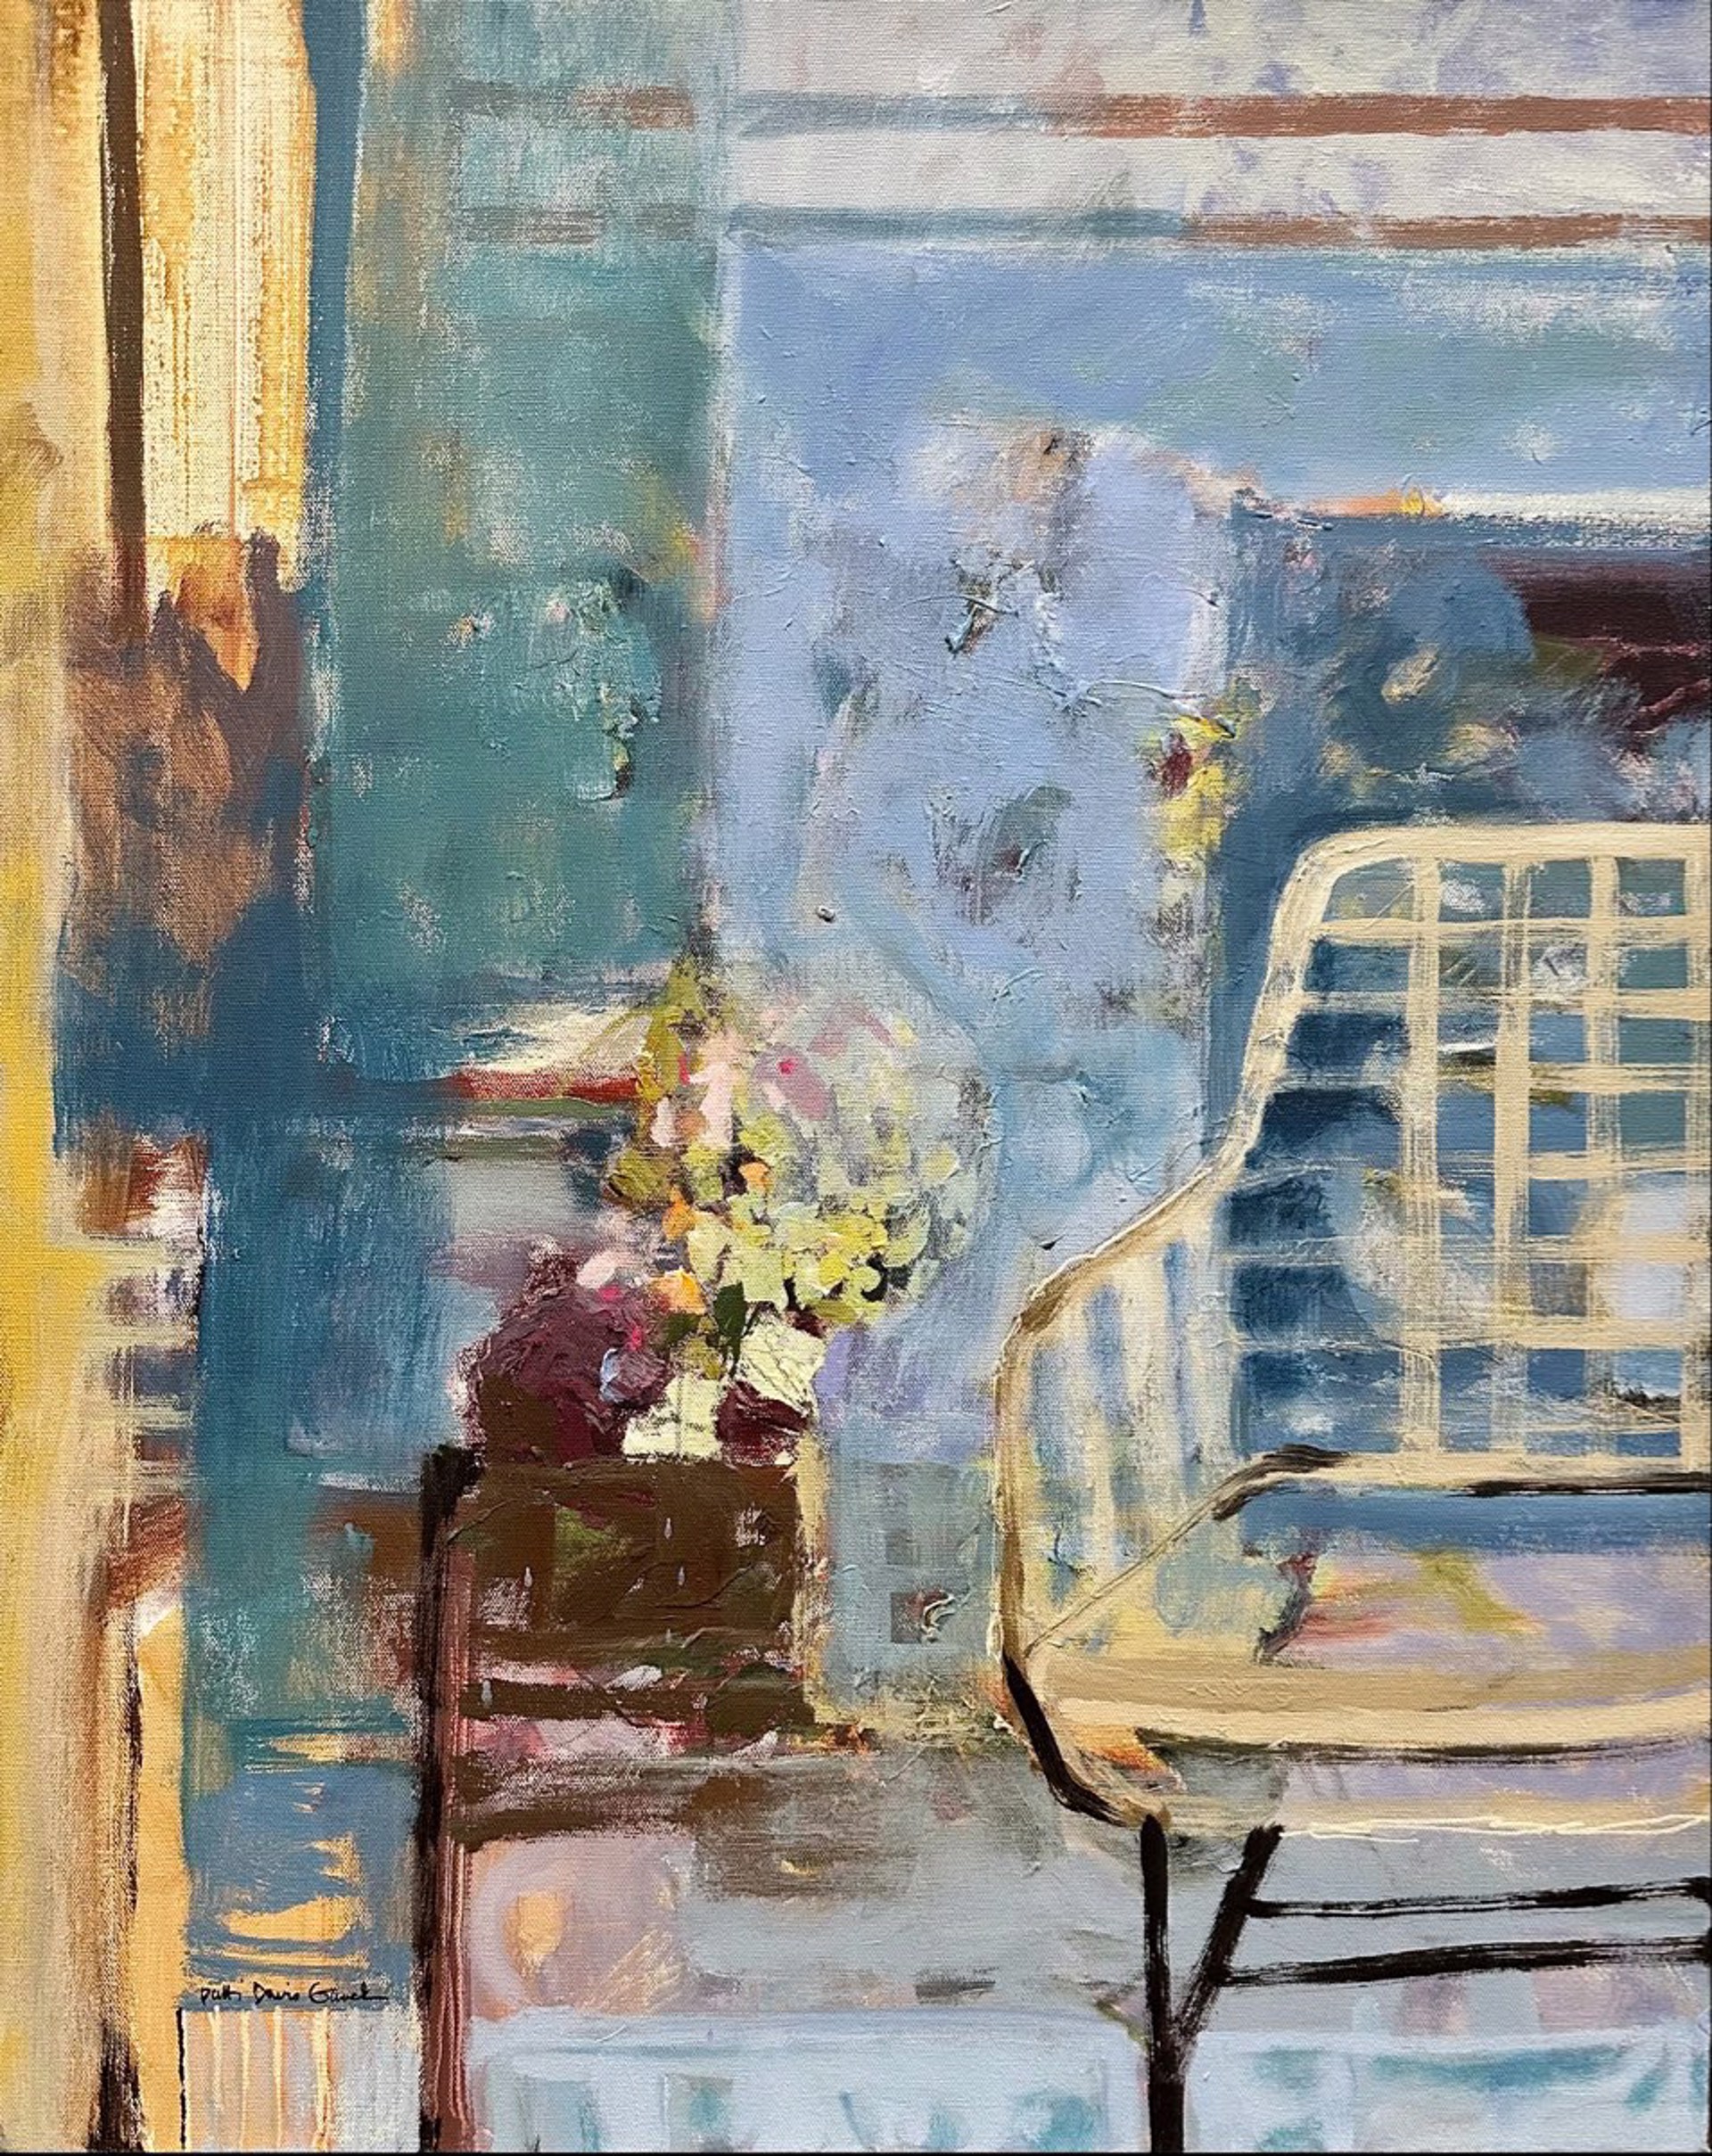 Flowers and Chair Vignette by Patti Ganek